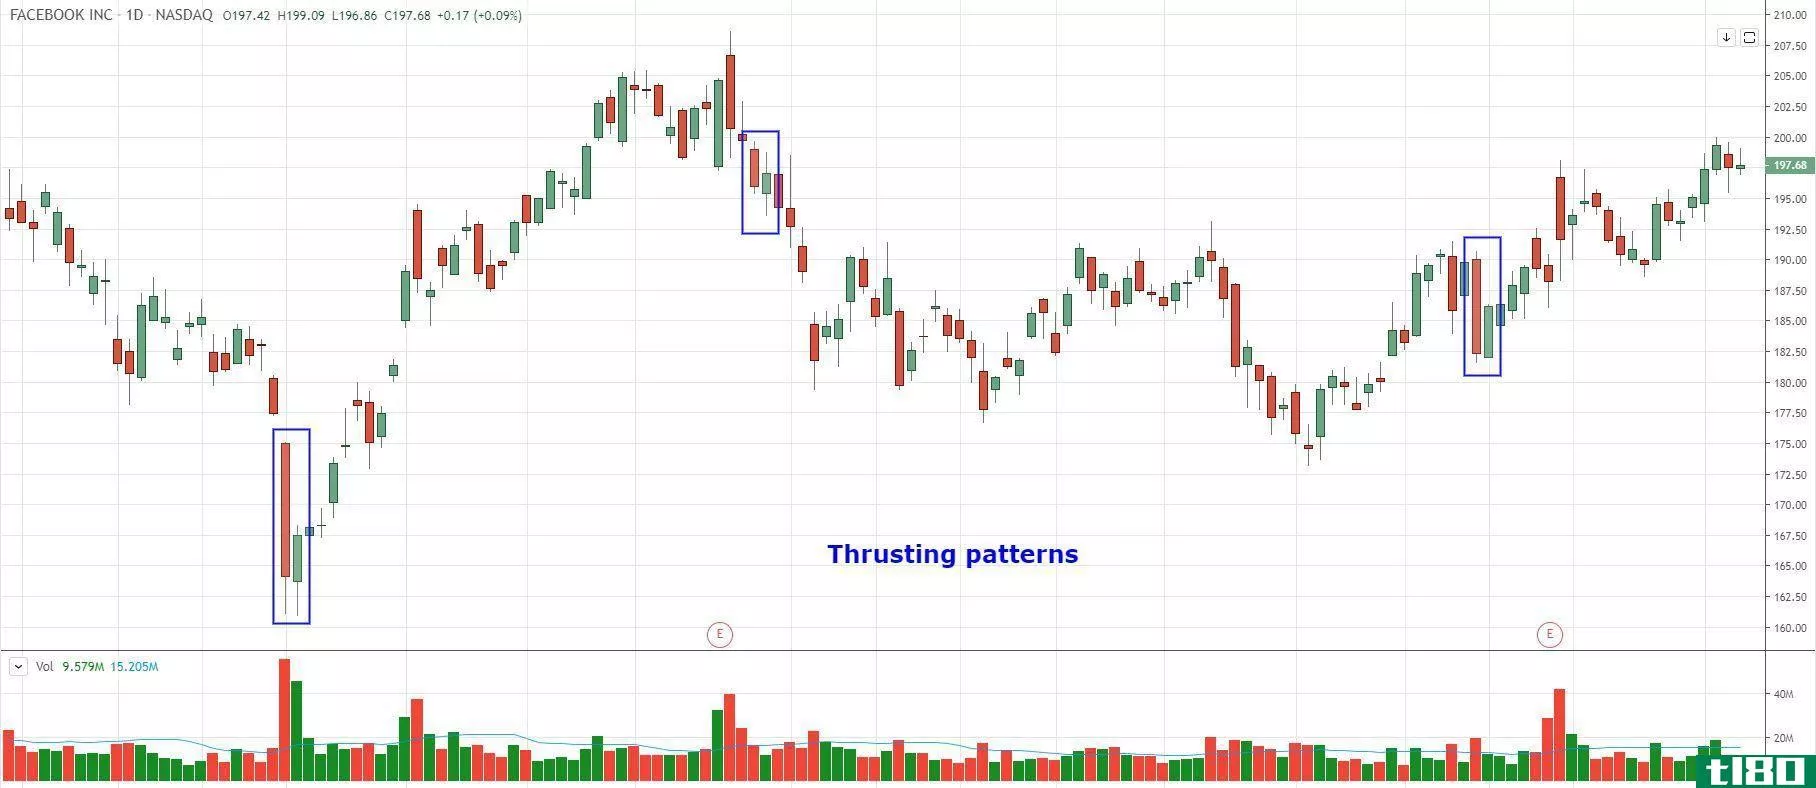 thrusting pattern stock chart example